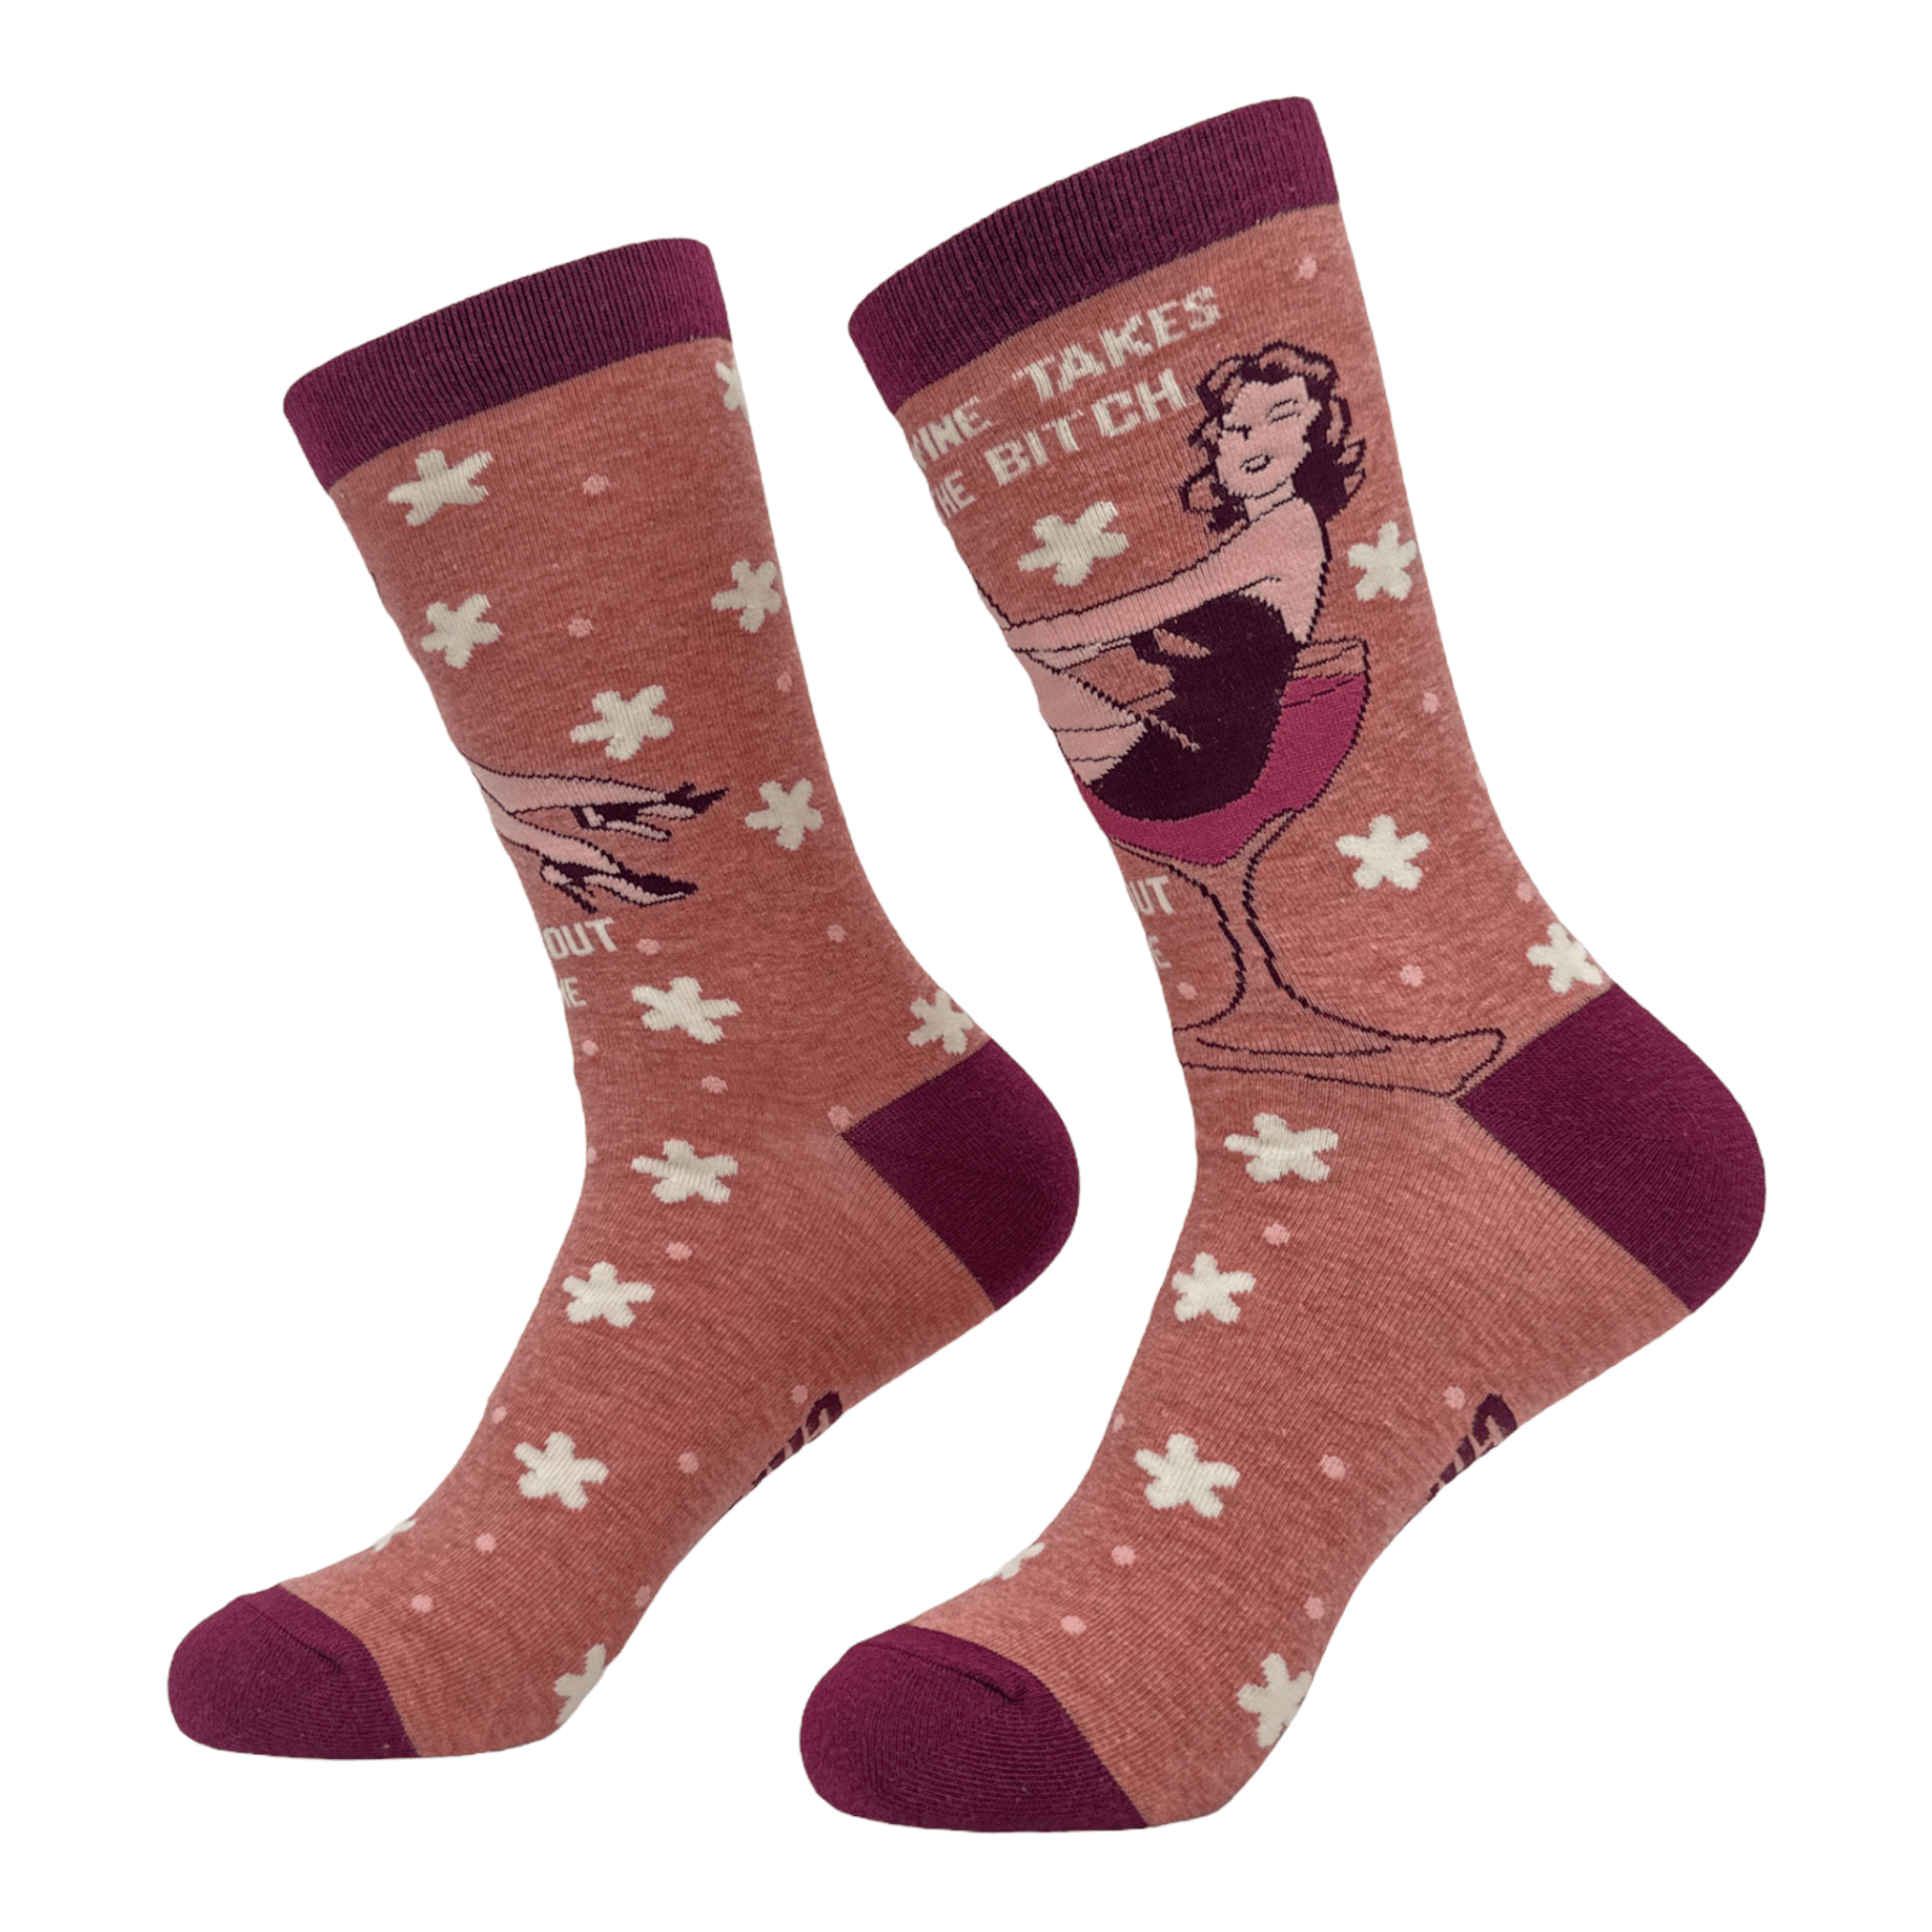 Women's Wine Takes The Bitch Right Out Of Me Socks  -  Crazy Dog T-Shirts